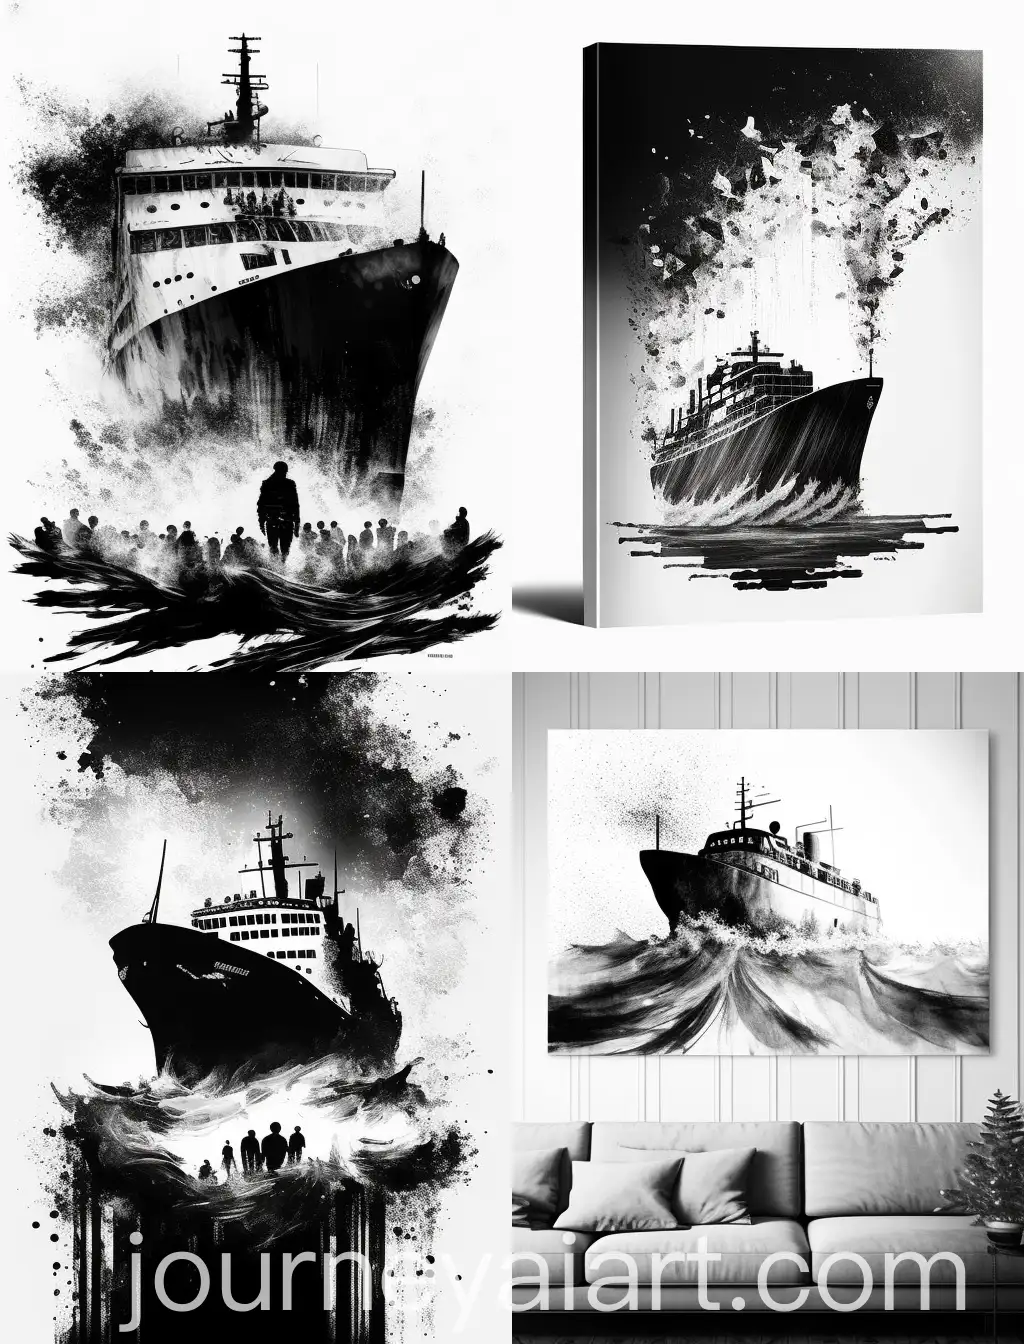 Cargo-Ship-Drifting-in-Vast-Ocean-with-100-Refugees-Abstract-Delicate-Black-and-White-Watercolor-Style